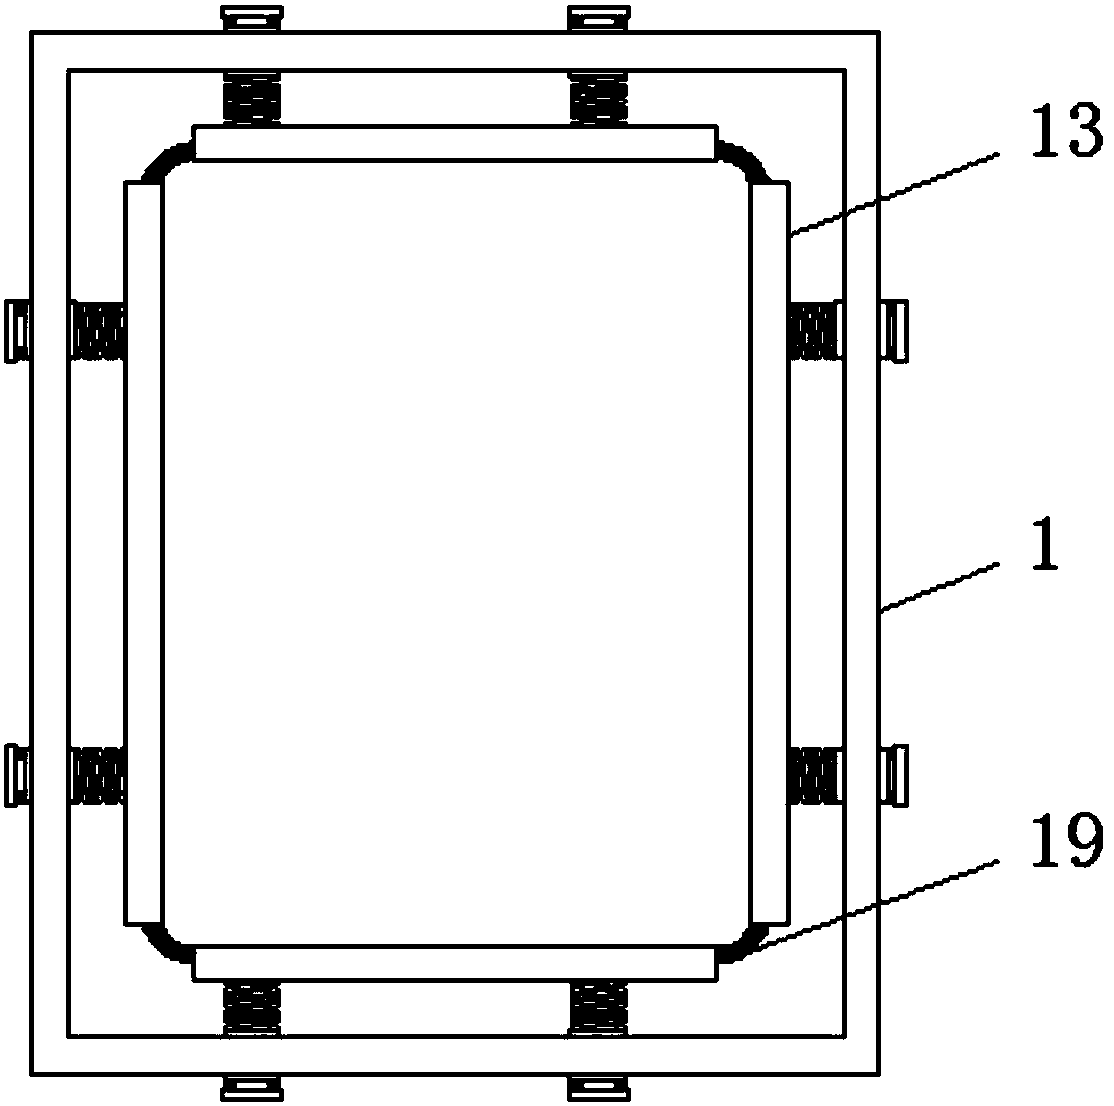 Sewage treatment apparatus capable of preventing box breakage